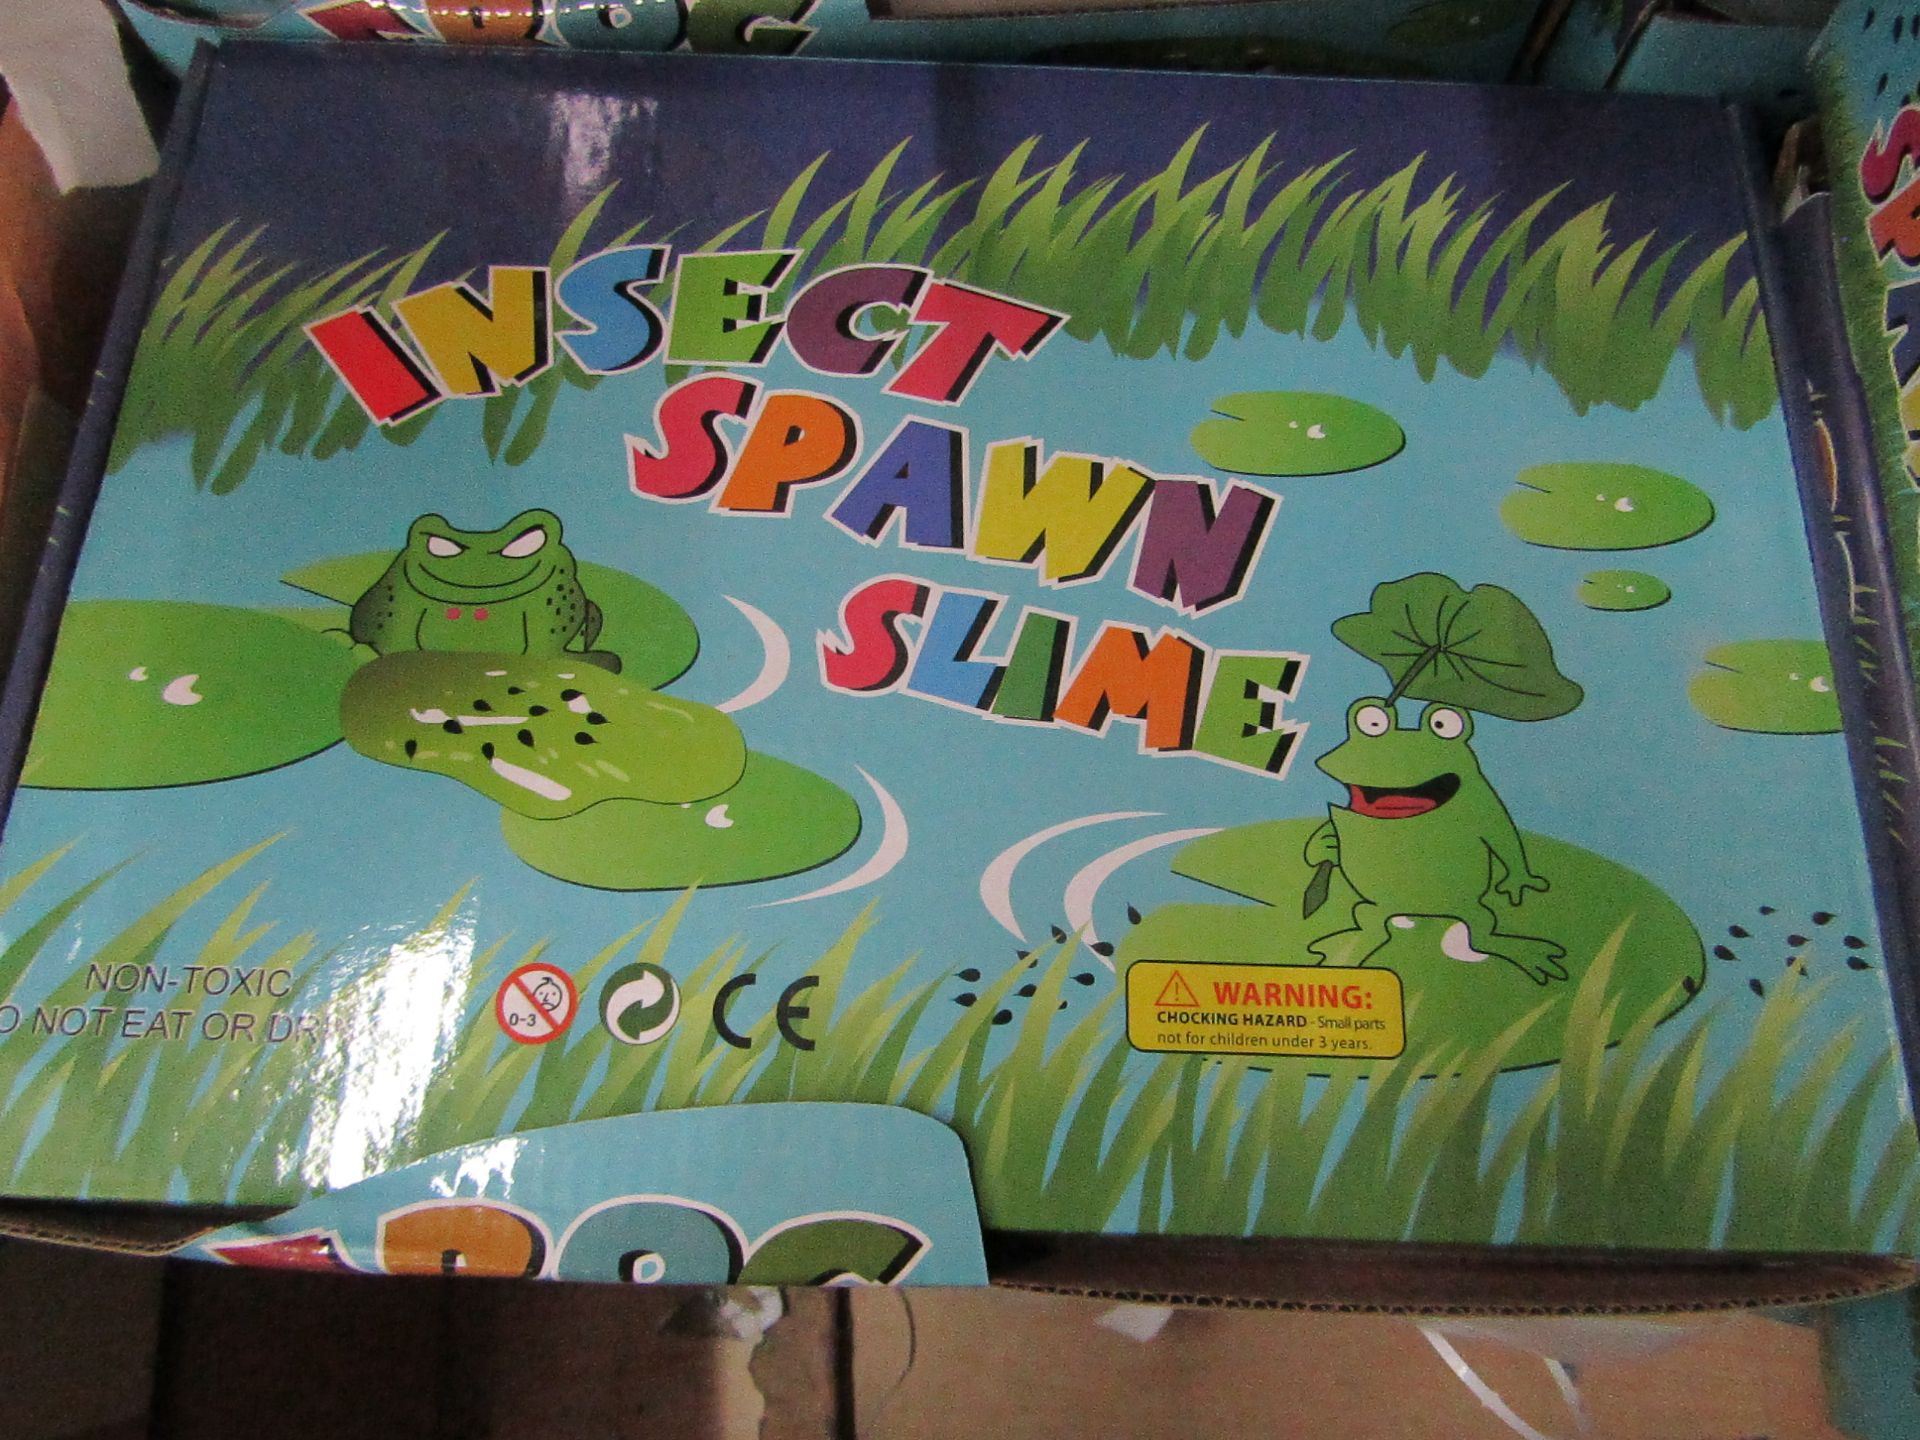 Box of 12 Pots of Spawn Slime - Unused & Boxed.